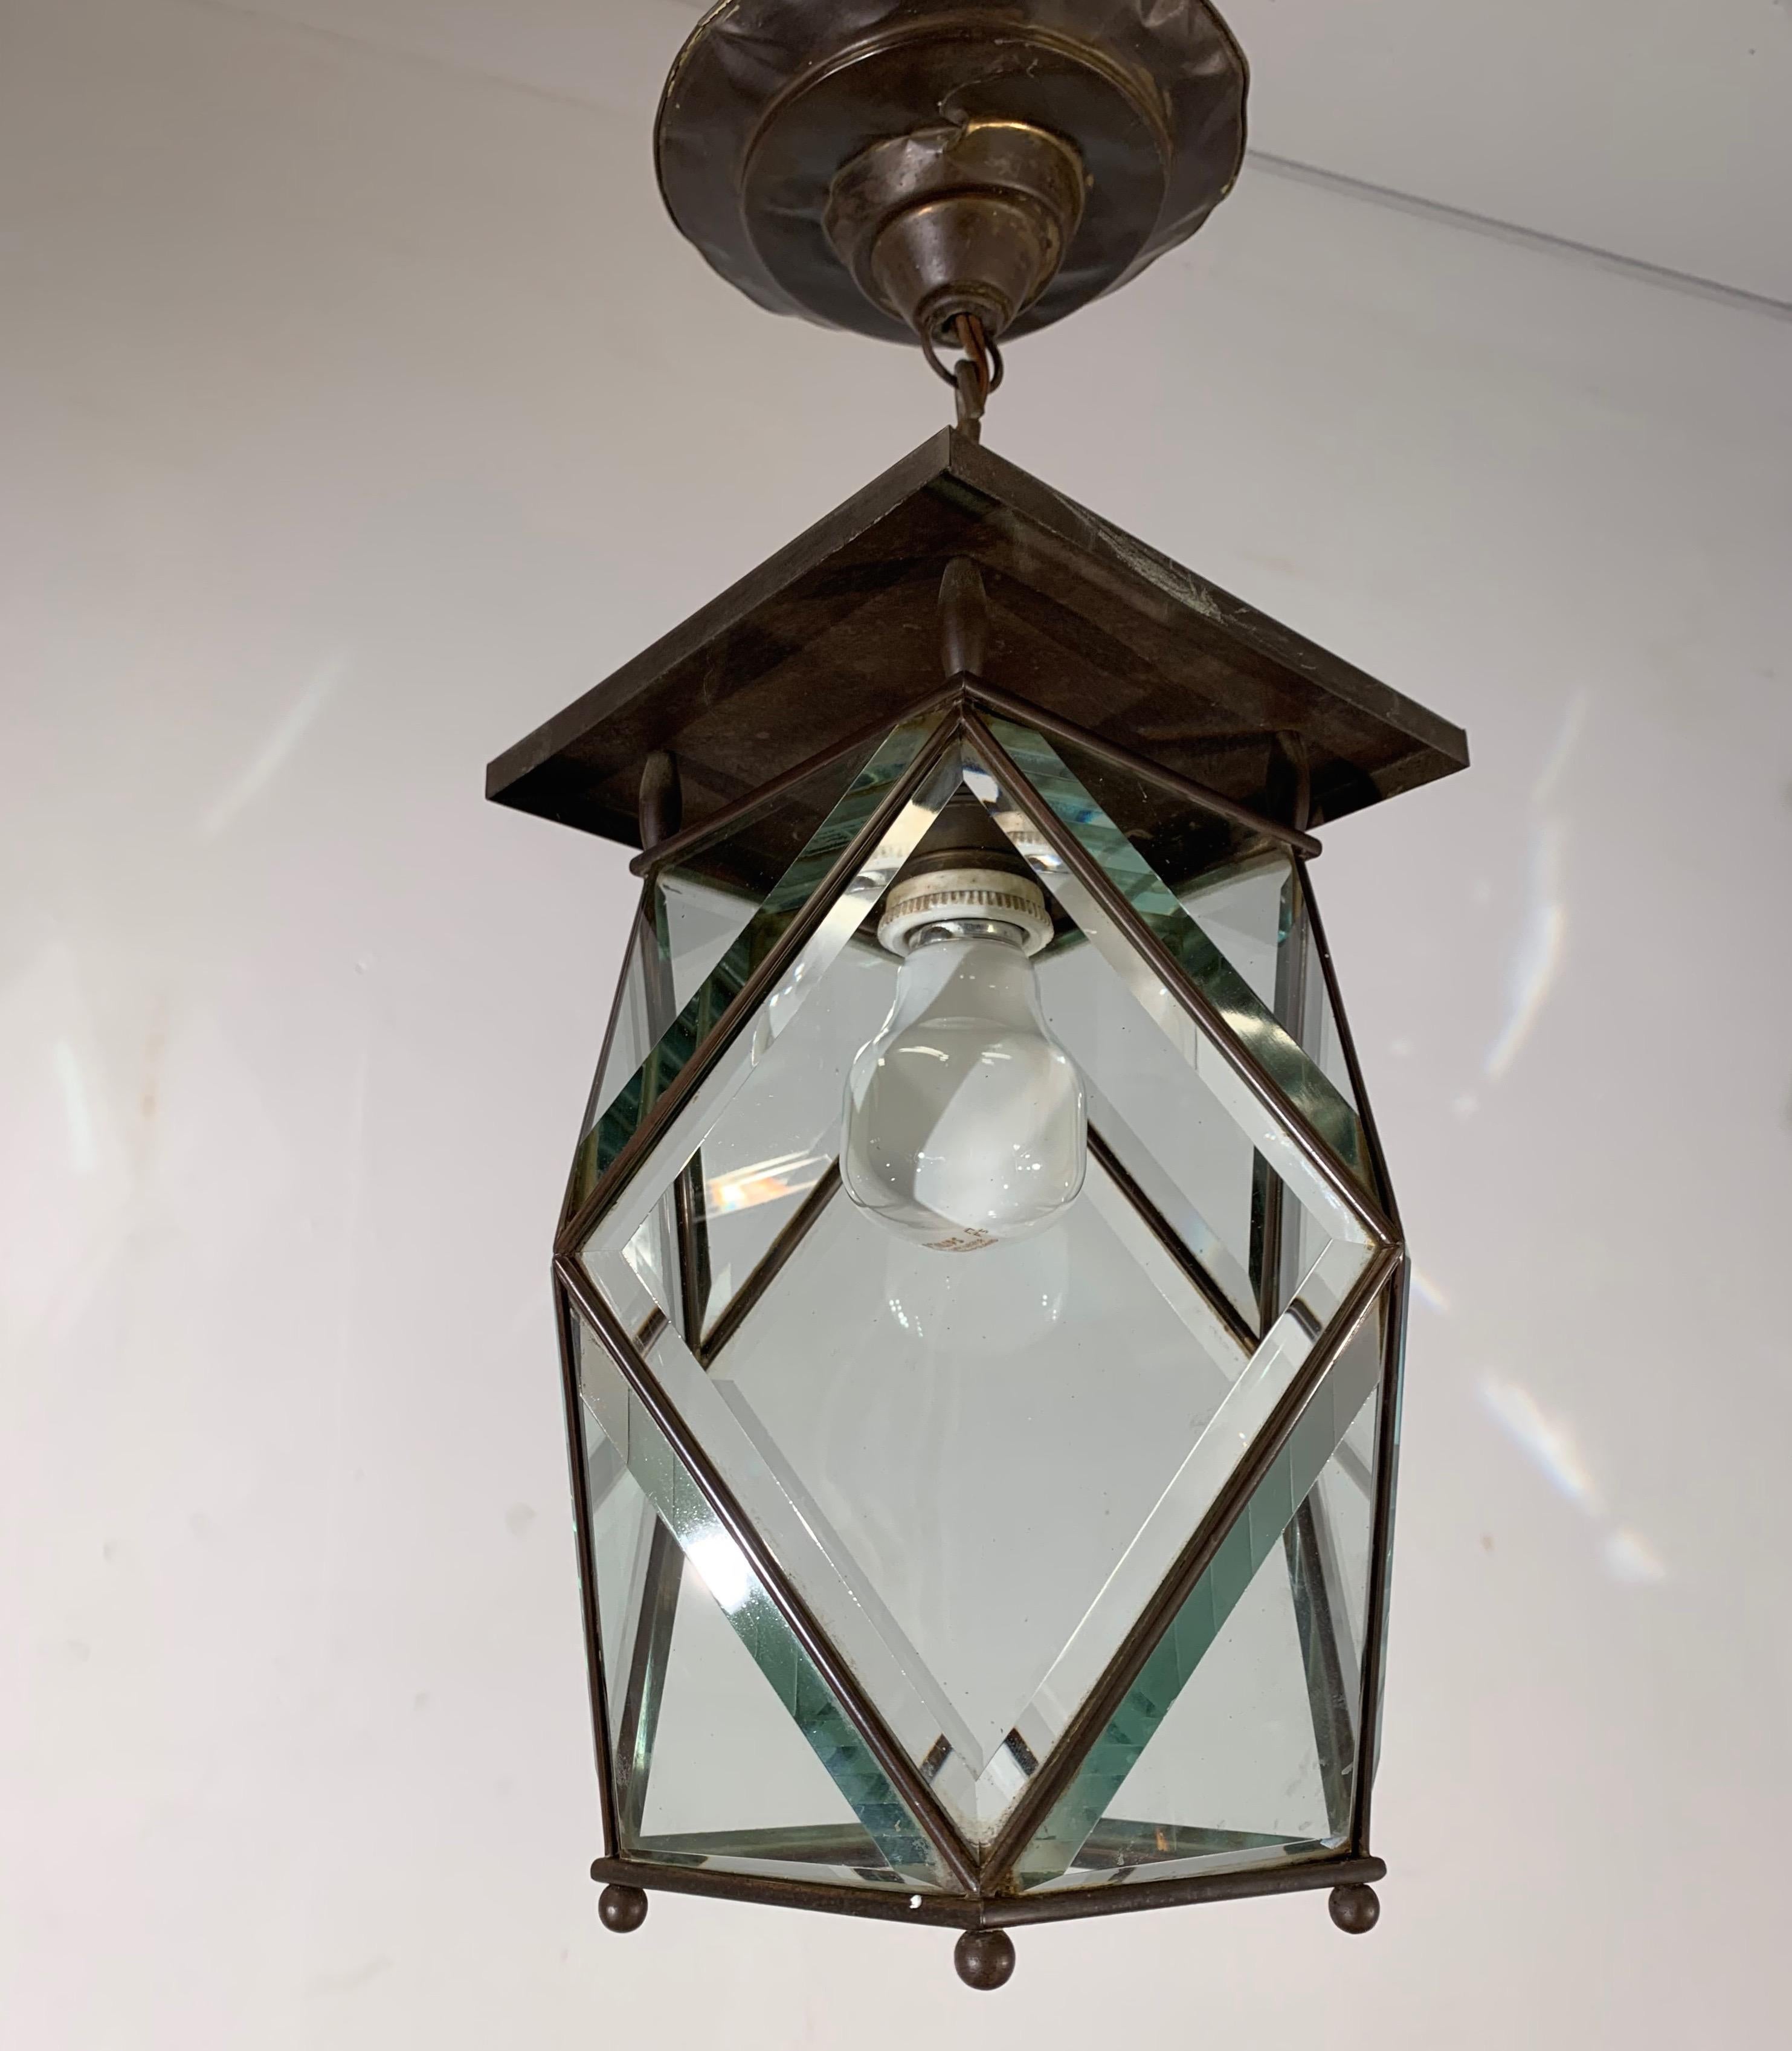 Stylish Arts & Crafts Brass and Beveled Glass Pendant Light in Adolf Loos Style 1